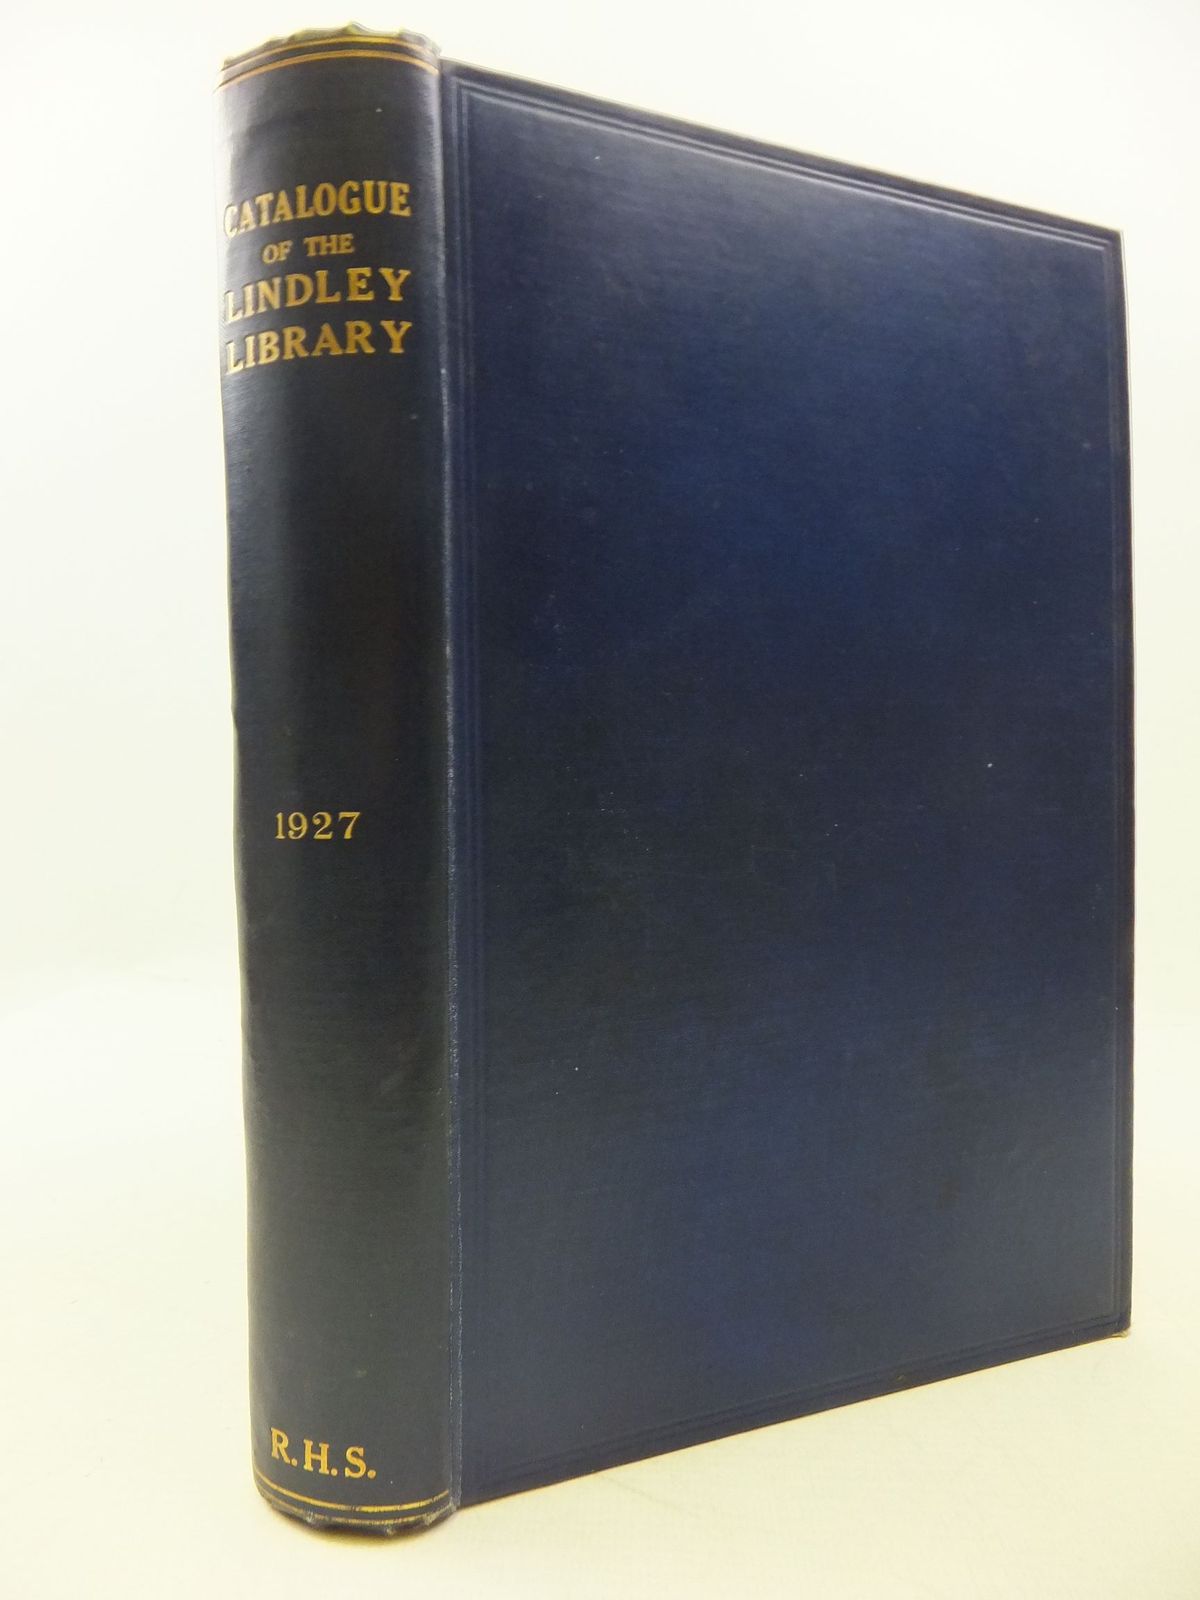 Photo of THE LINDLEY LIBRAY published by Royal Horticultural society (STOCK CODE: 1708833)  for sale by Stella & Rose's Books